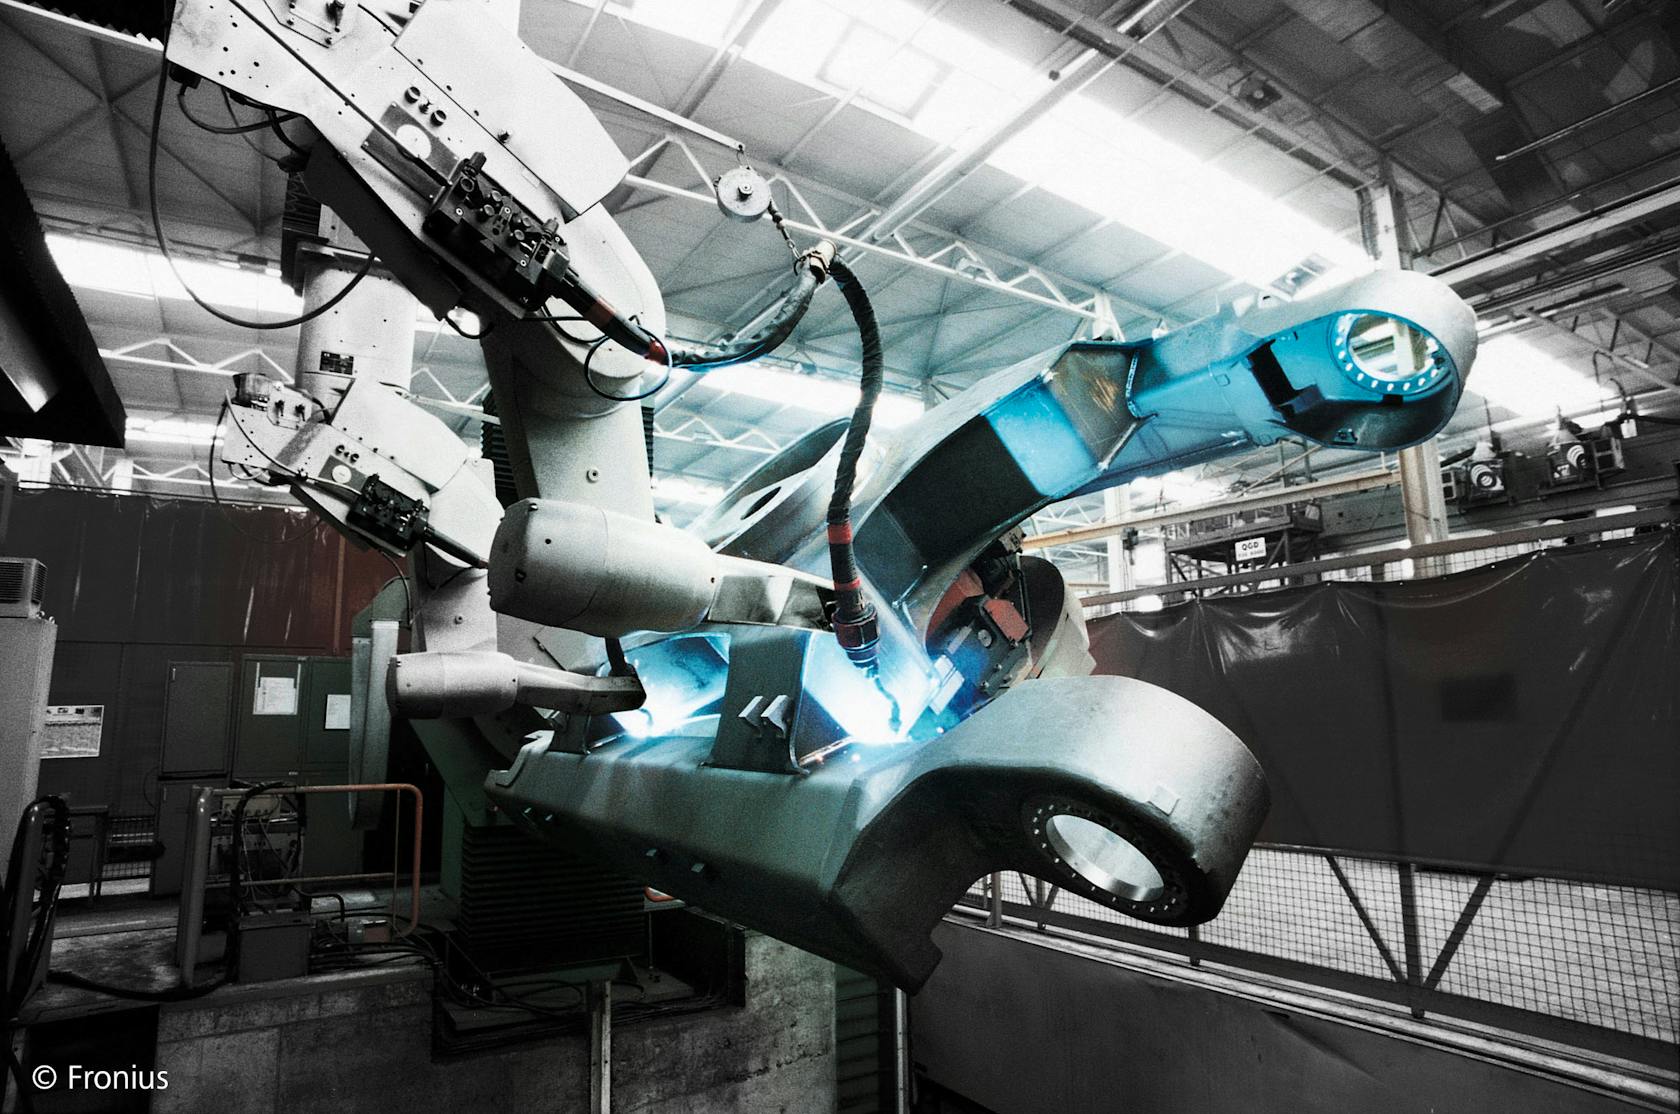 Automated welding in the automotive industry汽车工业中的自动焊接, ©Fronius